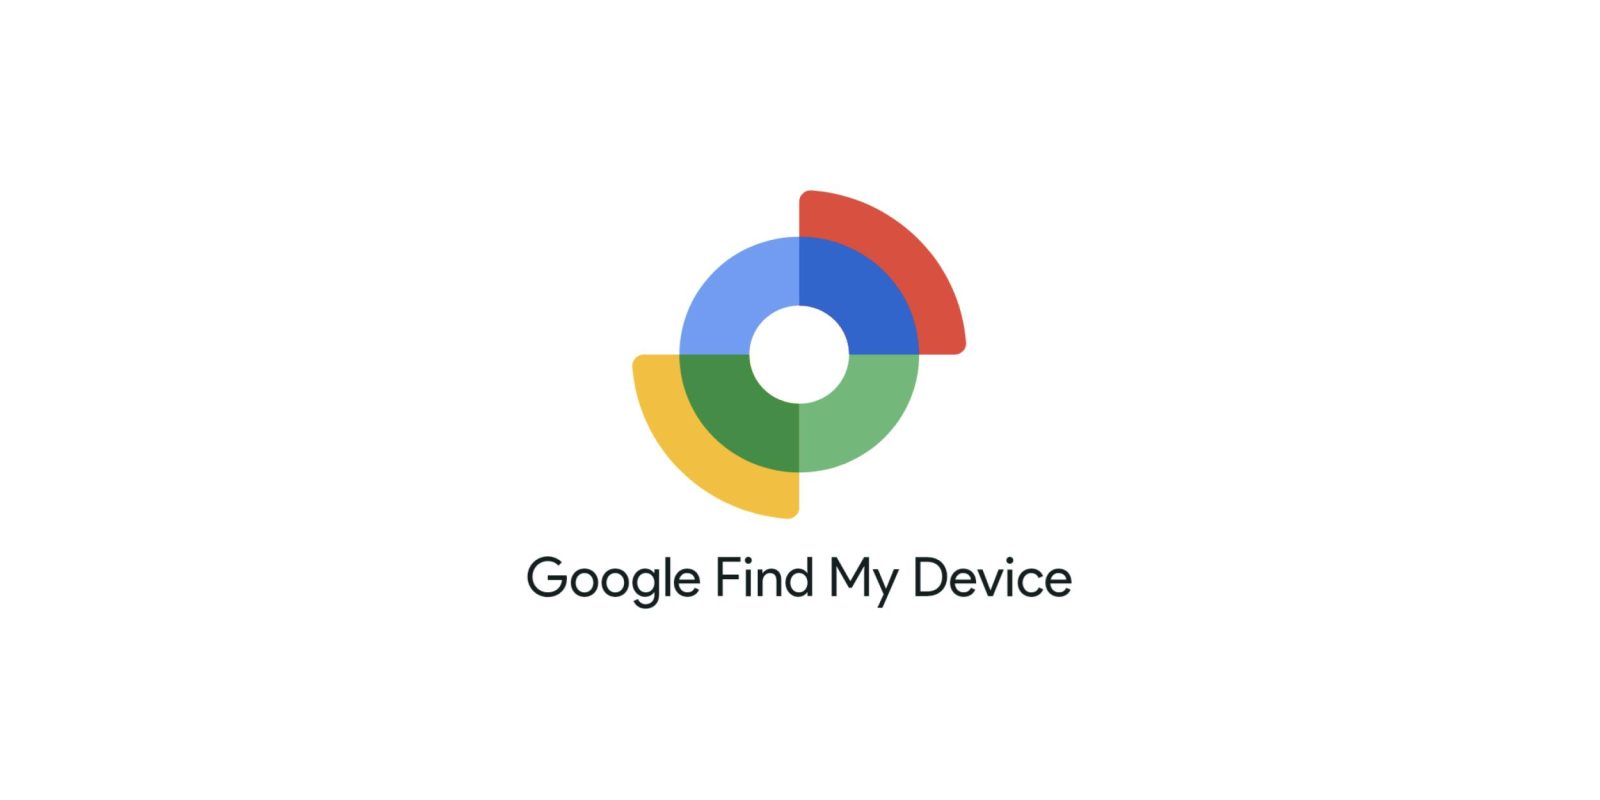 Find My Device 3.0 rolling out with new Android app icon